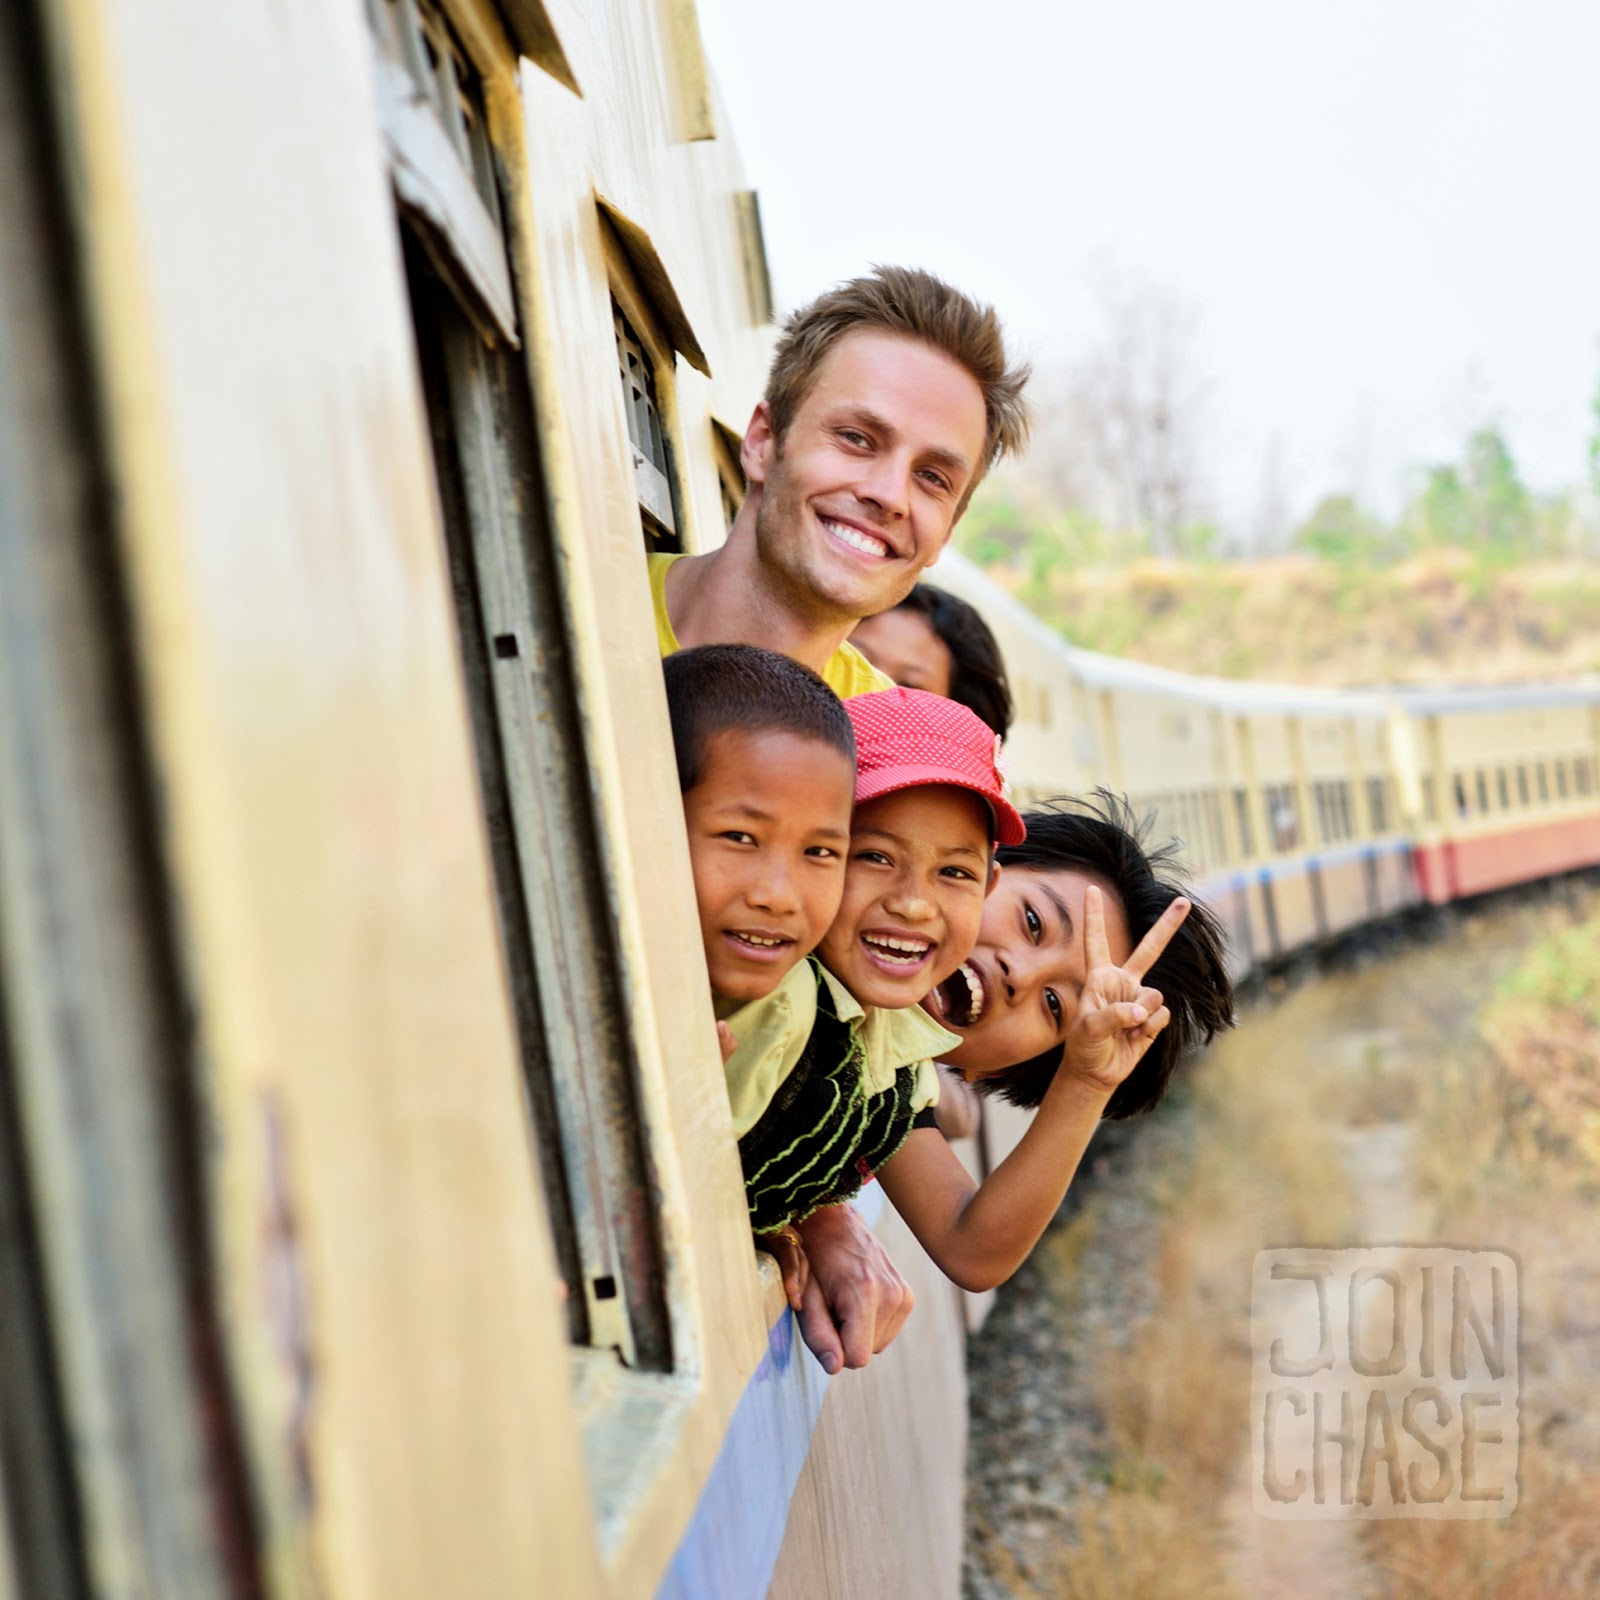 Chase Chisholm peeking out the window with children on a train from Yangon to Bagan, Myanmar.